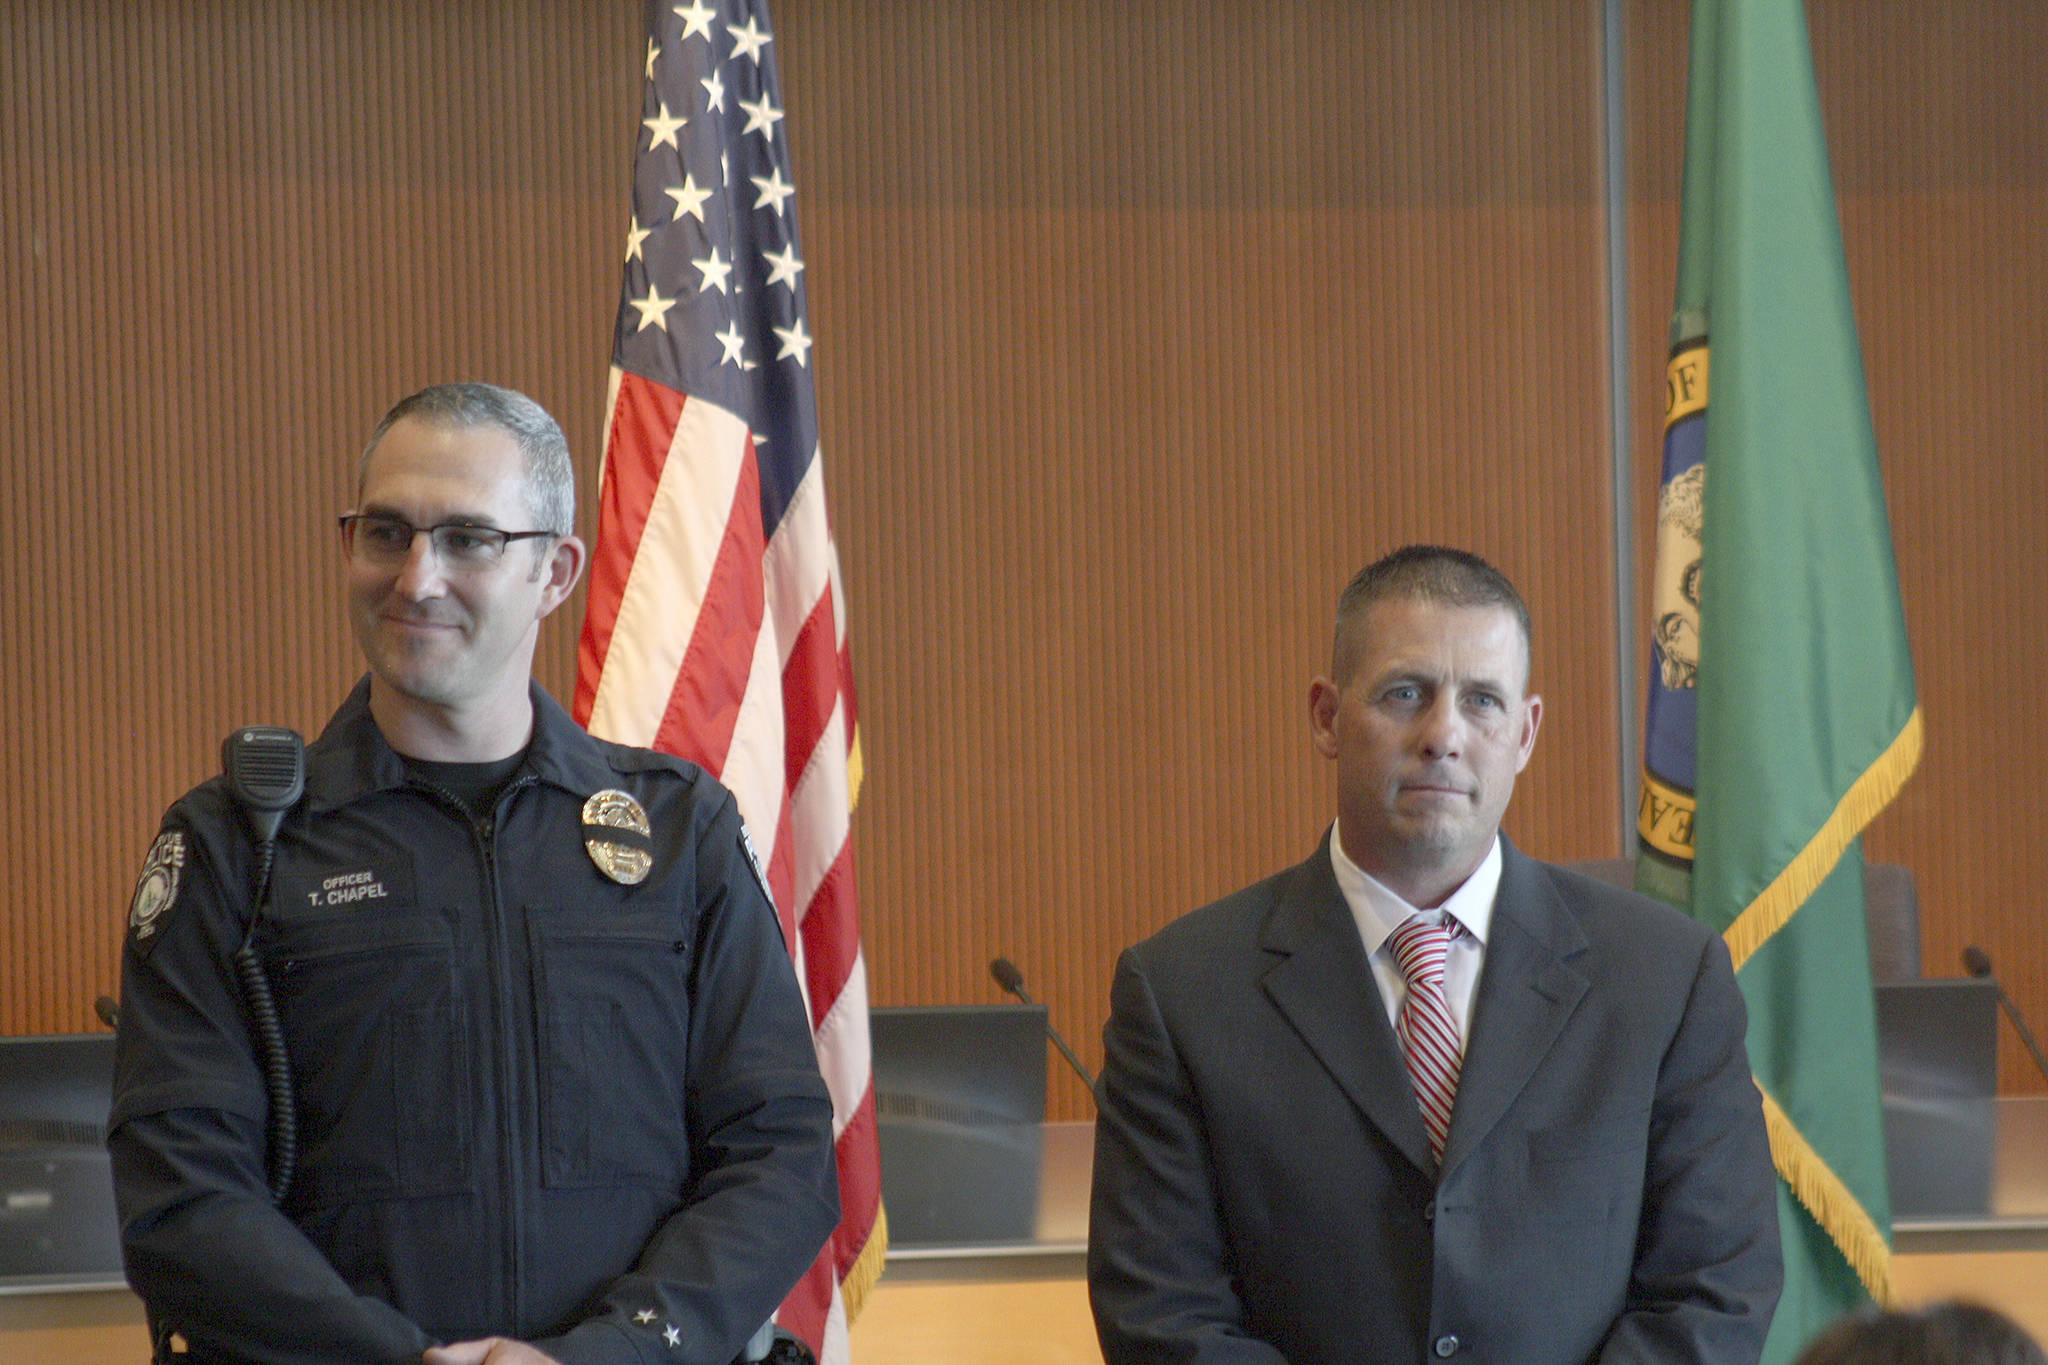 Bellevue Police honor their own at annual awards ceremony